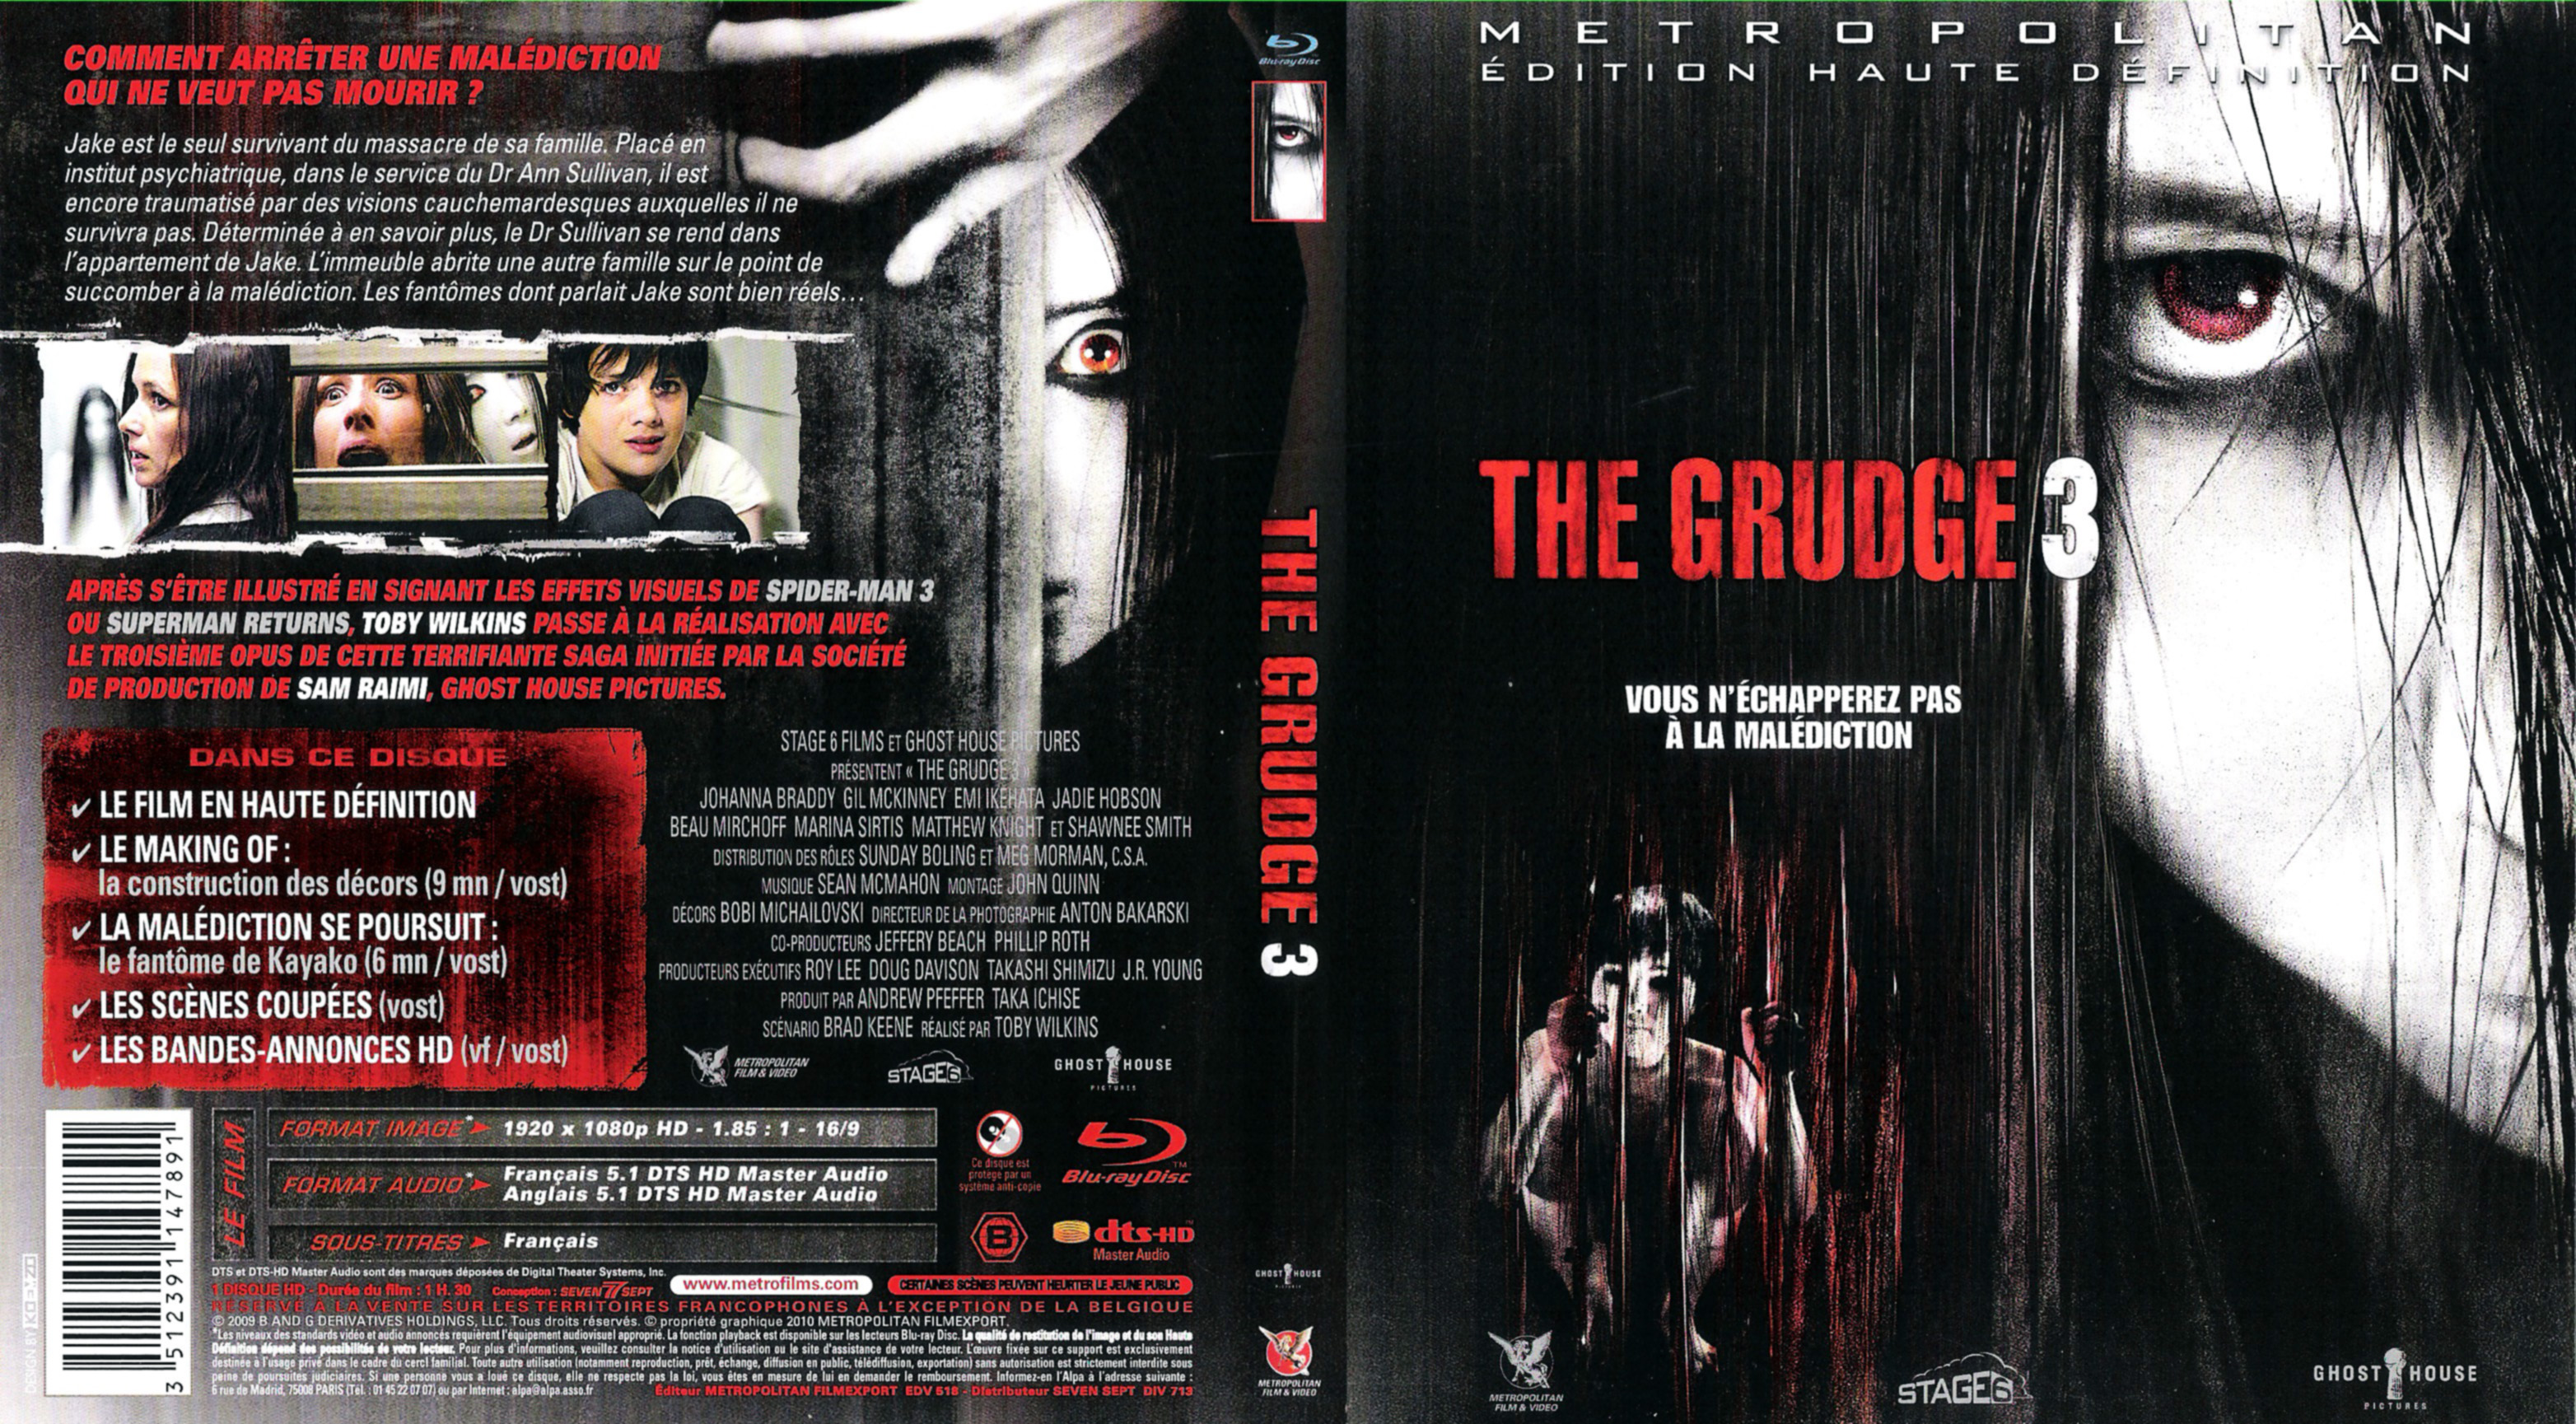 Jaquette DVD The grudge 3 (BLU-RAY)